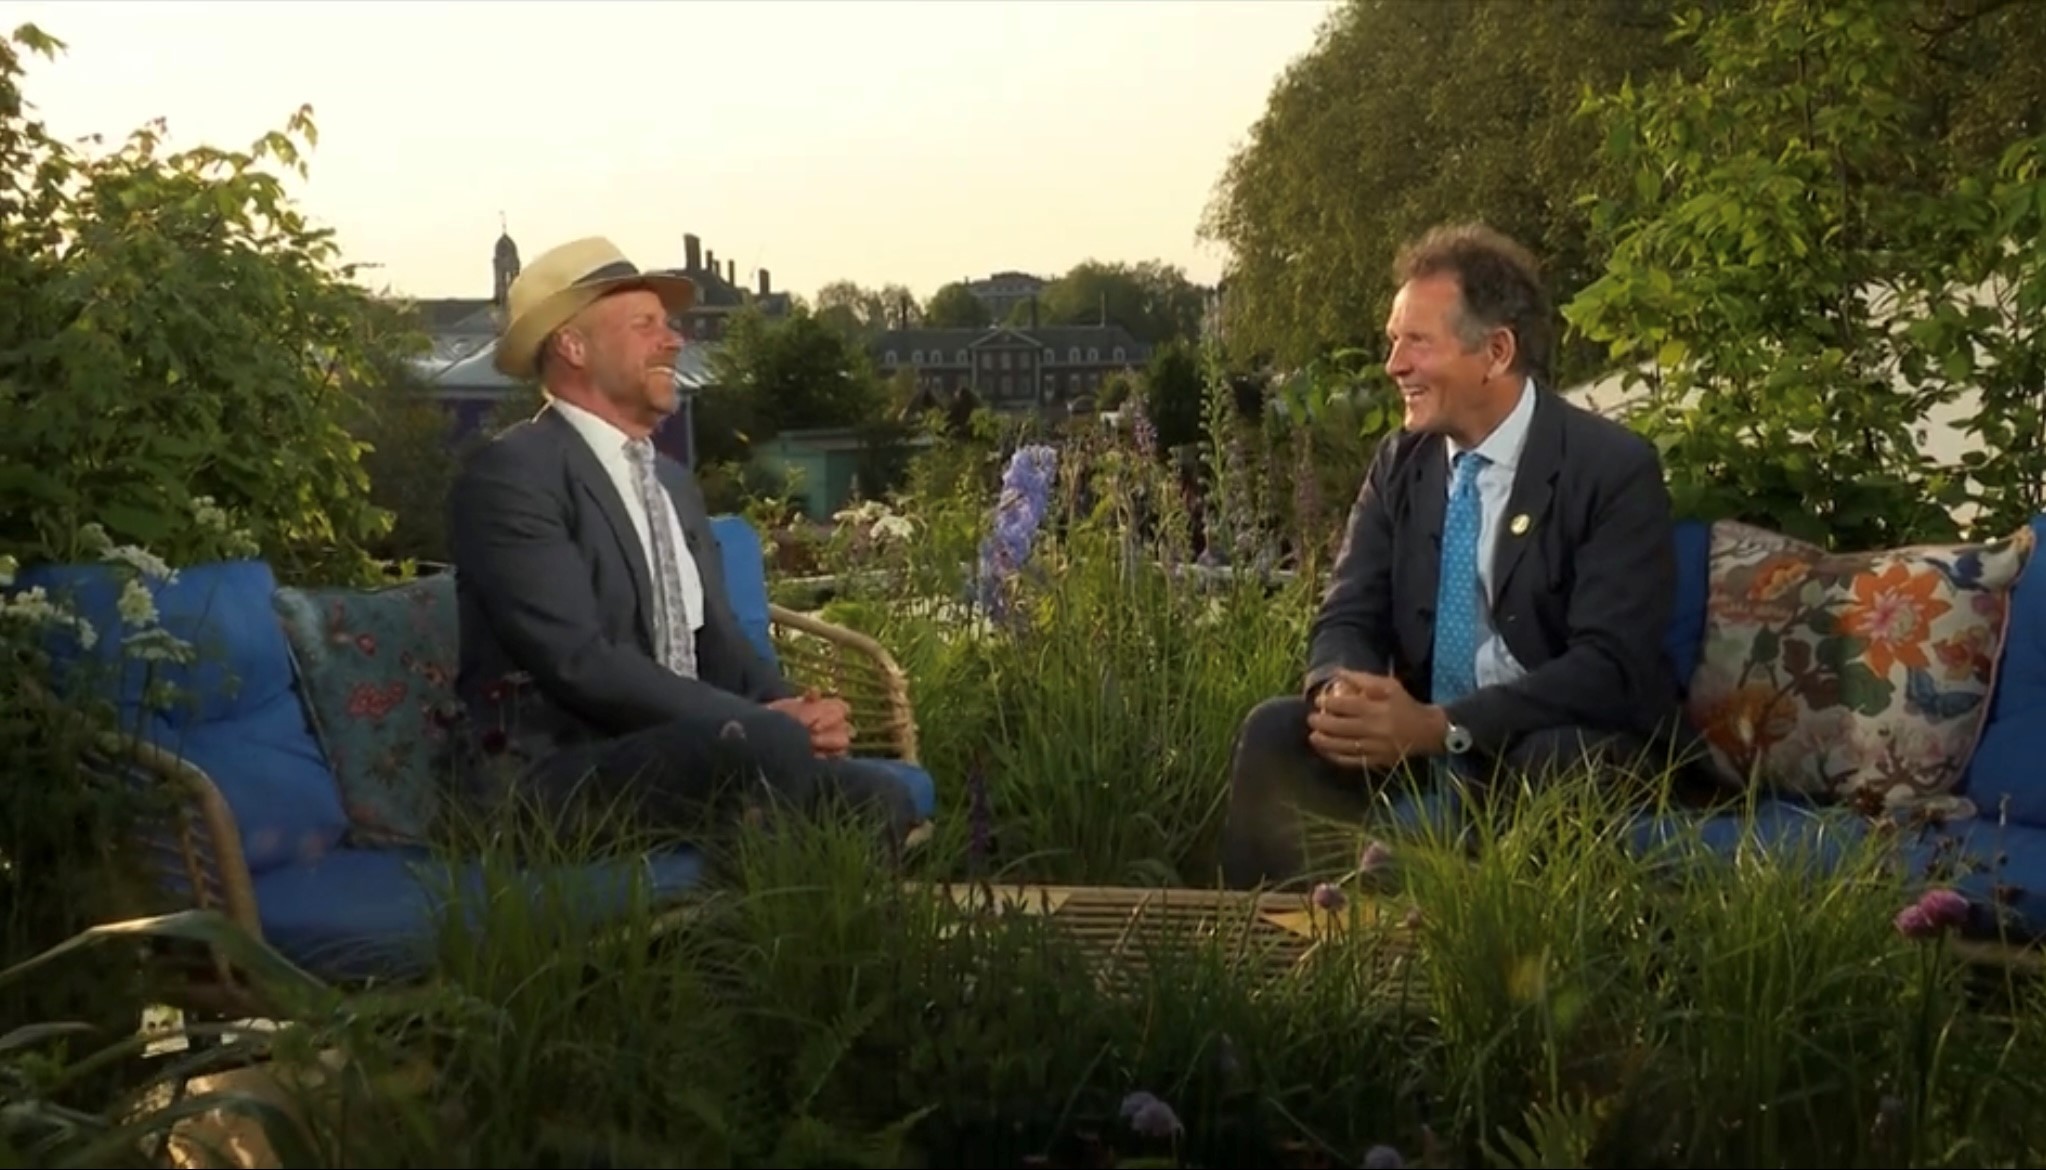 Monty Don and Joe Swift anchoring the RHS Chelsea Flower Show coverage.